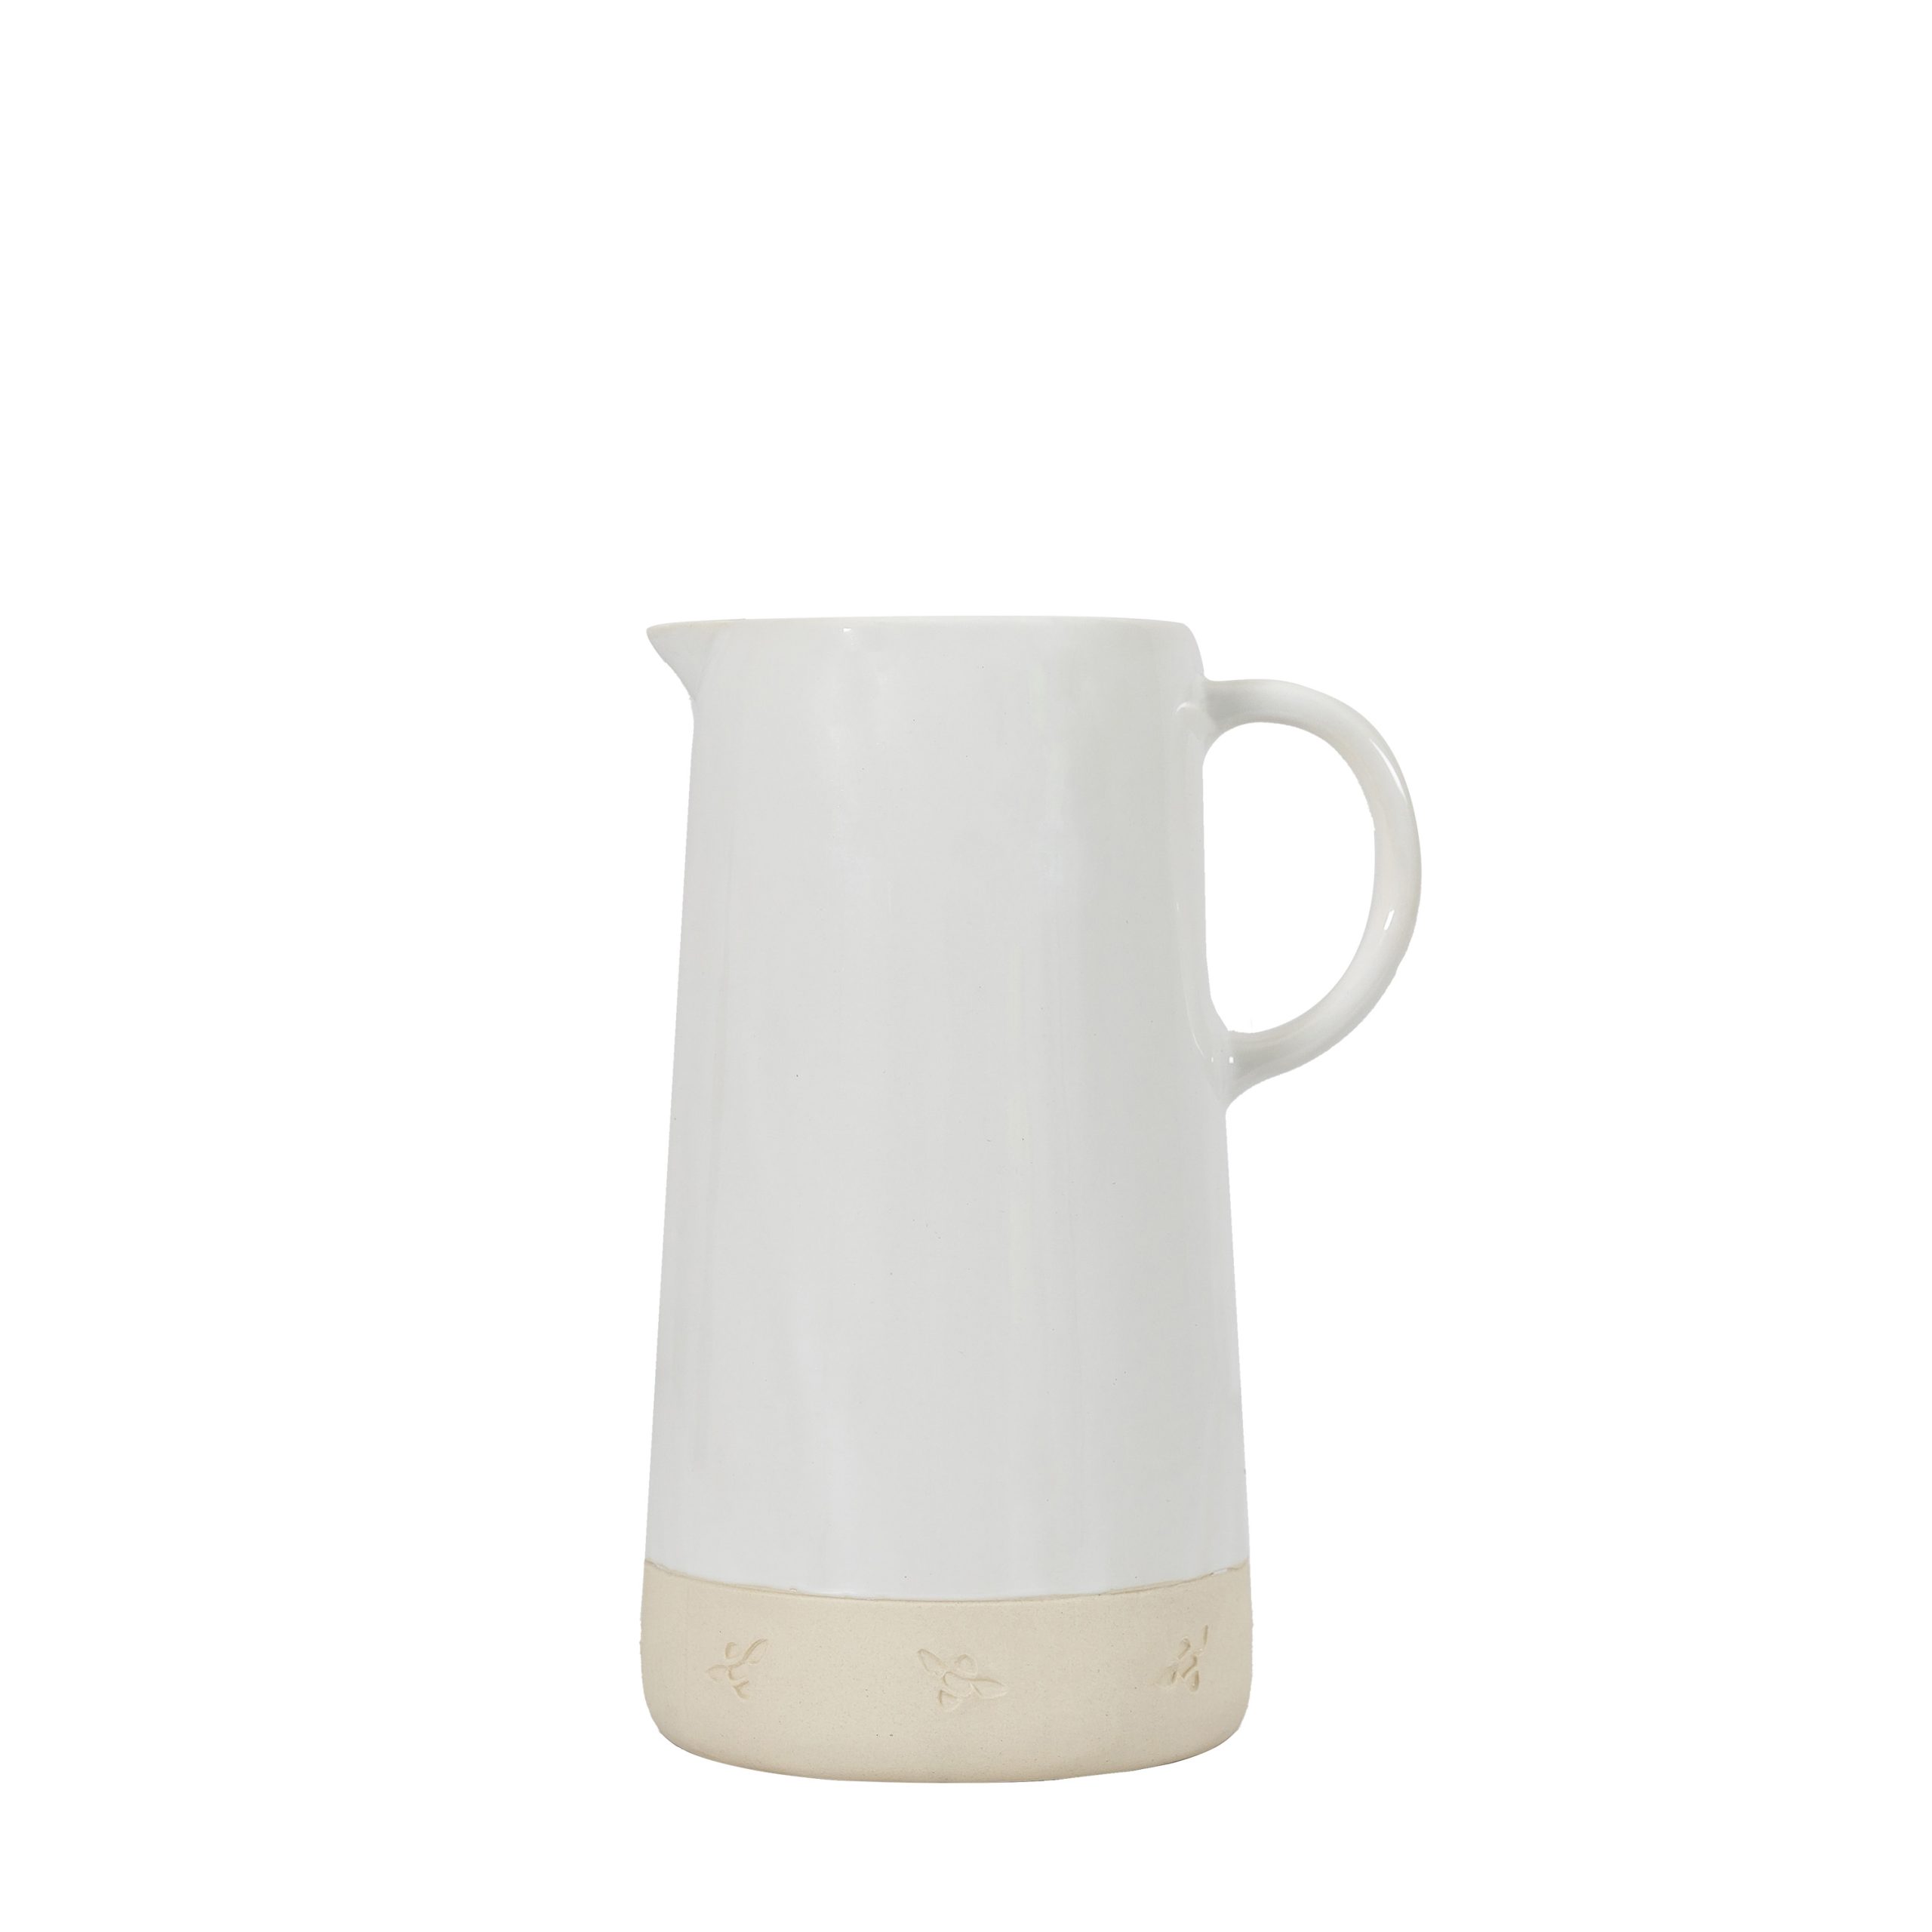 Gallery Direct Bee Jug White